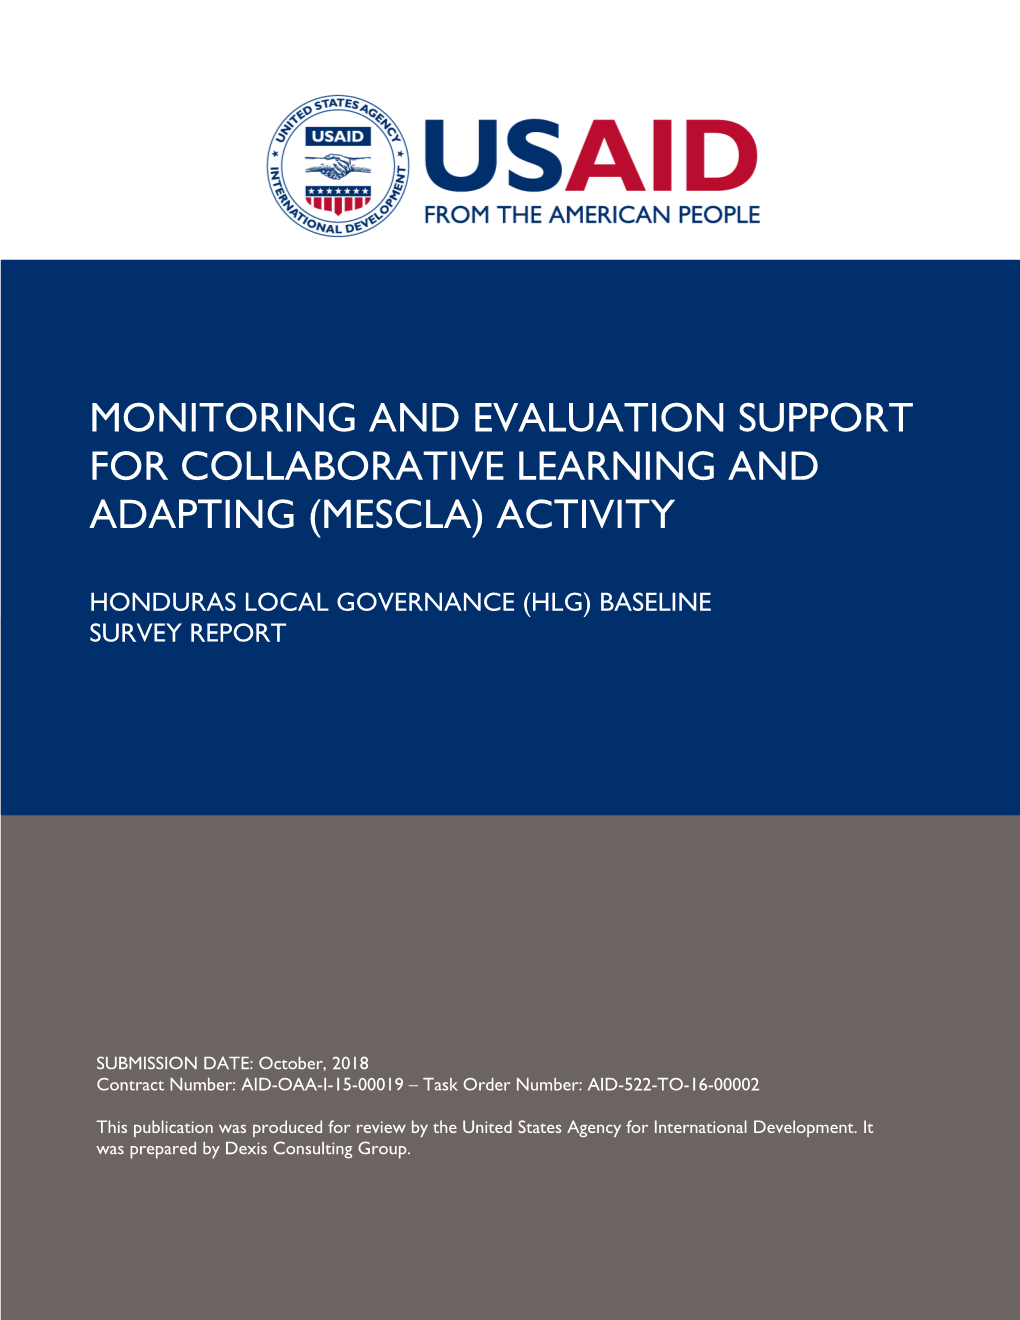 Monitoring and Evaluation Support for Collaborative Learning and Adapting (Mescla) Activity